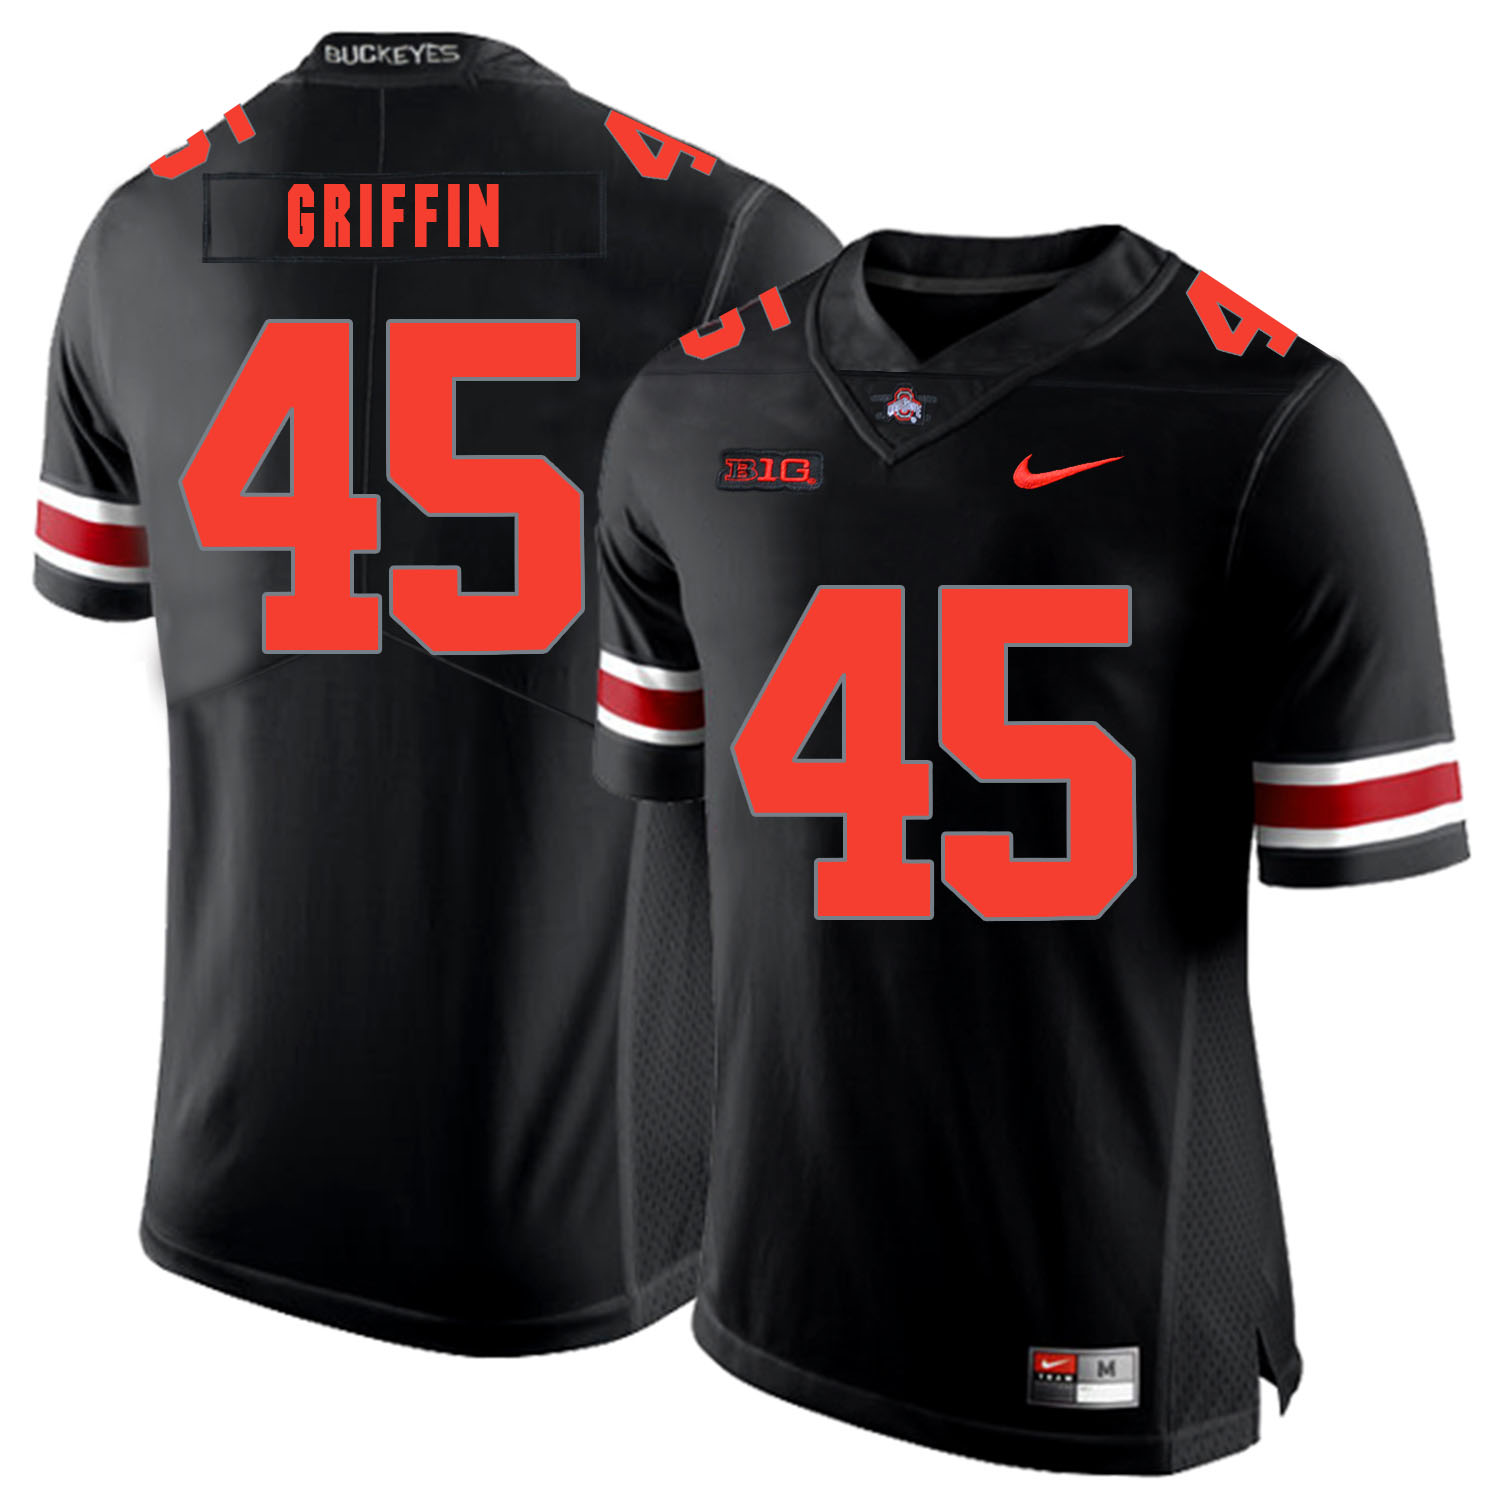 Ohio State Buckeyes 45 Archie Griffin Black Shadow Nike College Football Jersey